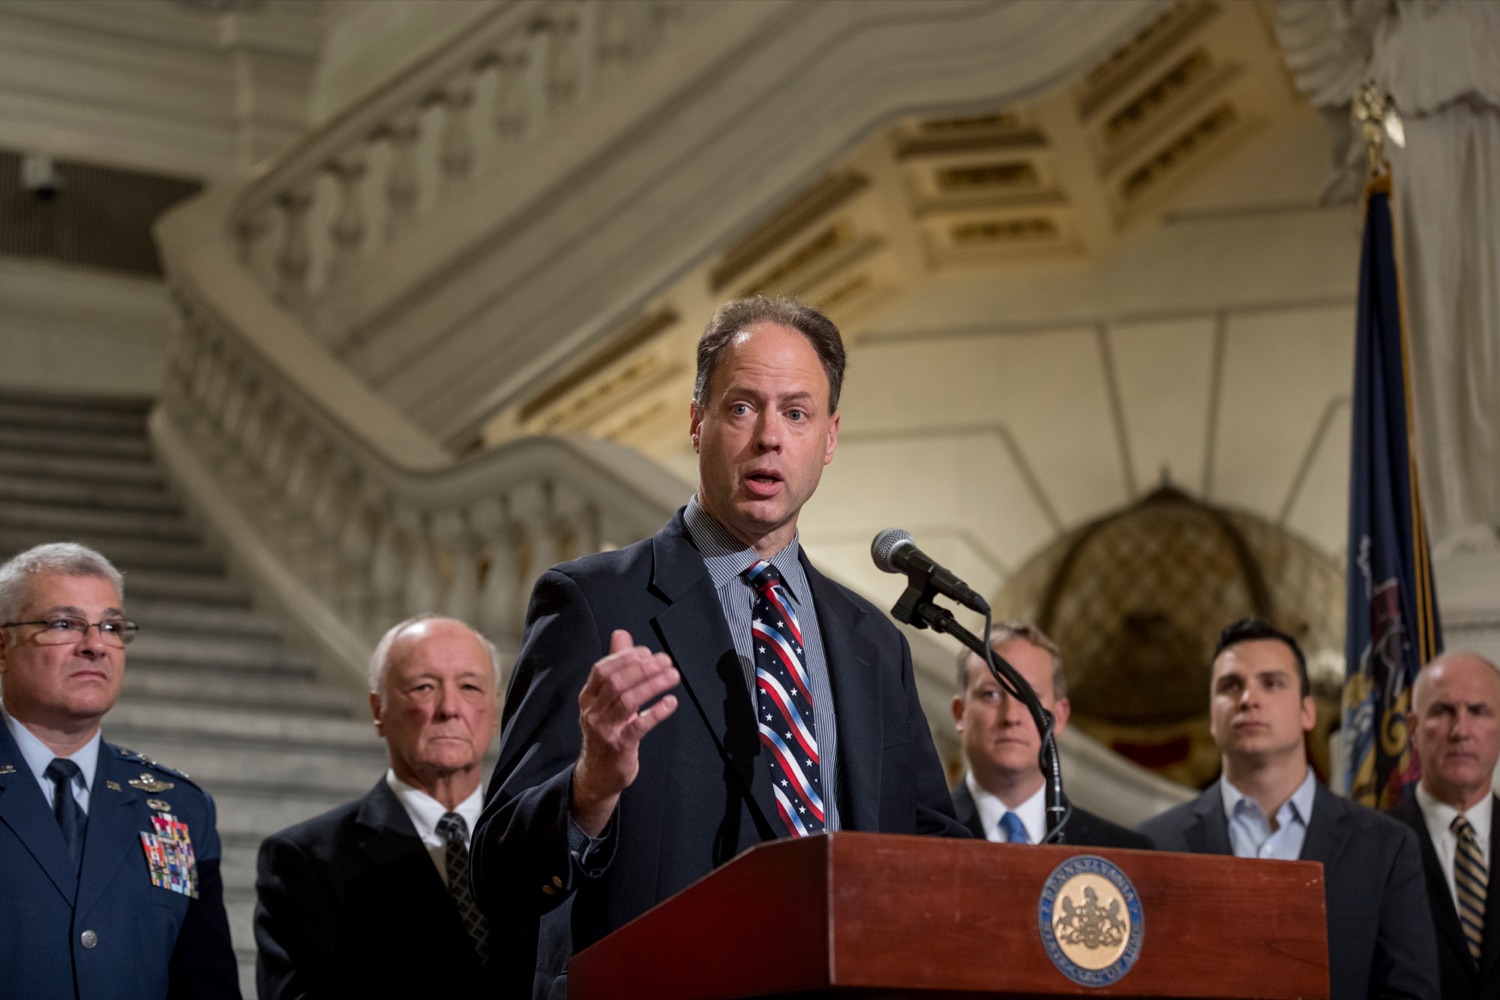 State Rep. Tom Murt speaks during a press conference outlining how competition for qualified individuals among all employment sectors affects military recruiting efforts and warrants greater investment in our next generation inside the Capitol Rotunda on Tuesday, November 12, 2019.<br><a href="https://filesource.amperwave.net/commonwealthofpa/photo/17588_GOV_Mission_Readiness_NK_010.JPG" target="_blank">⇣ Download Photo</a>